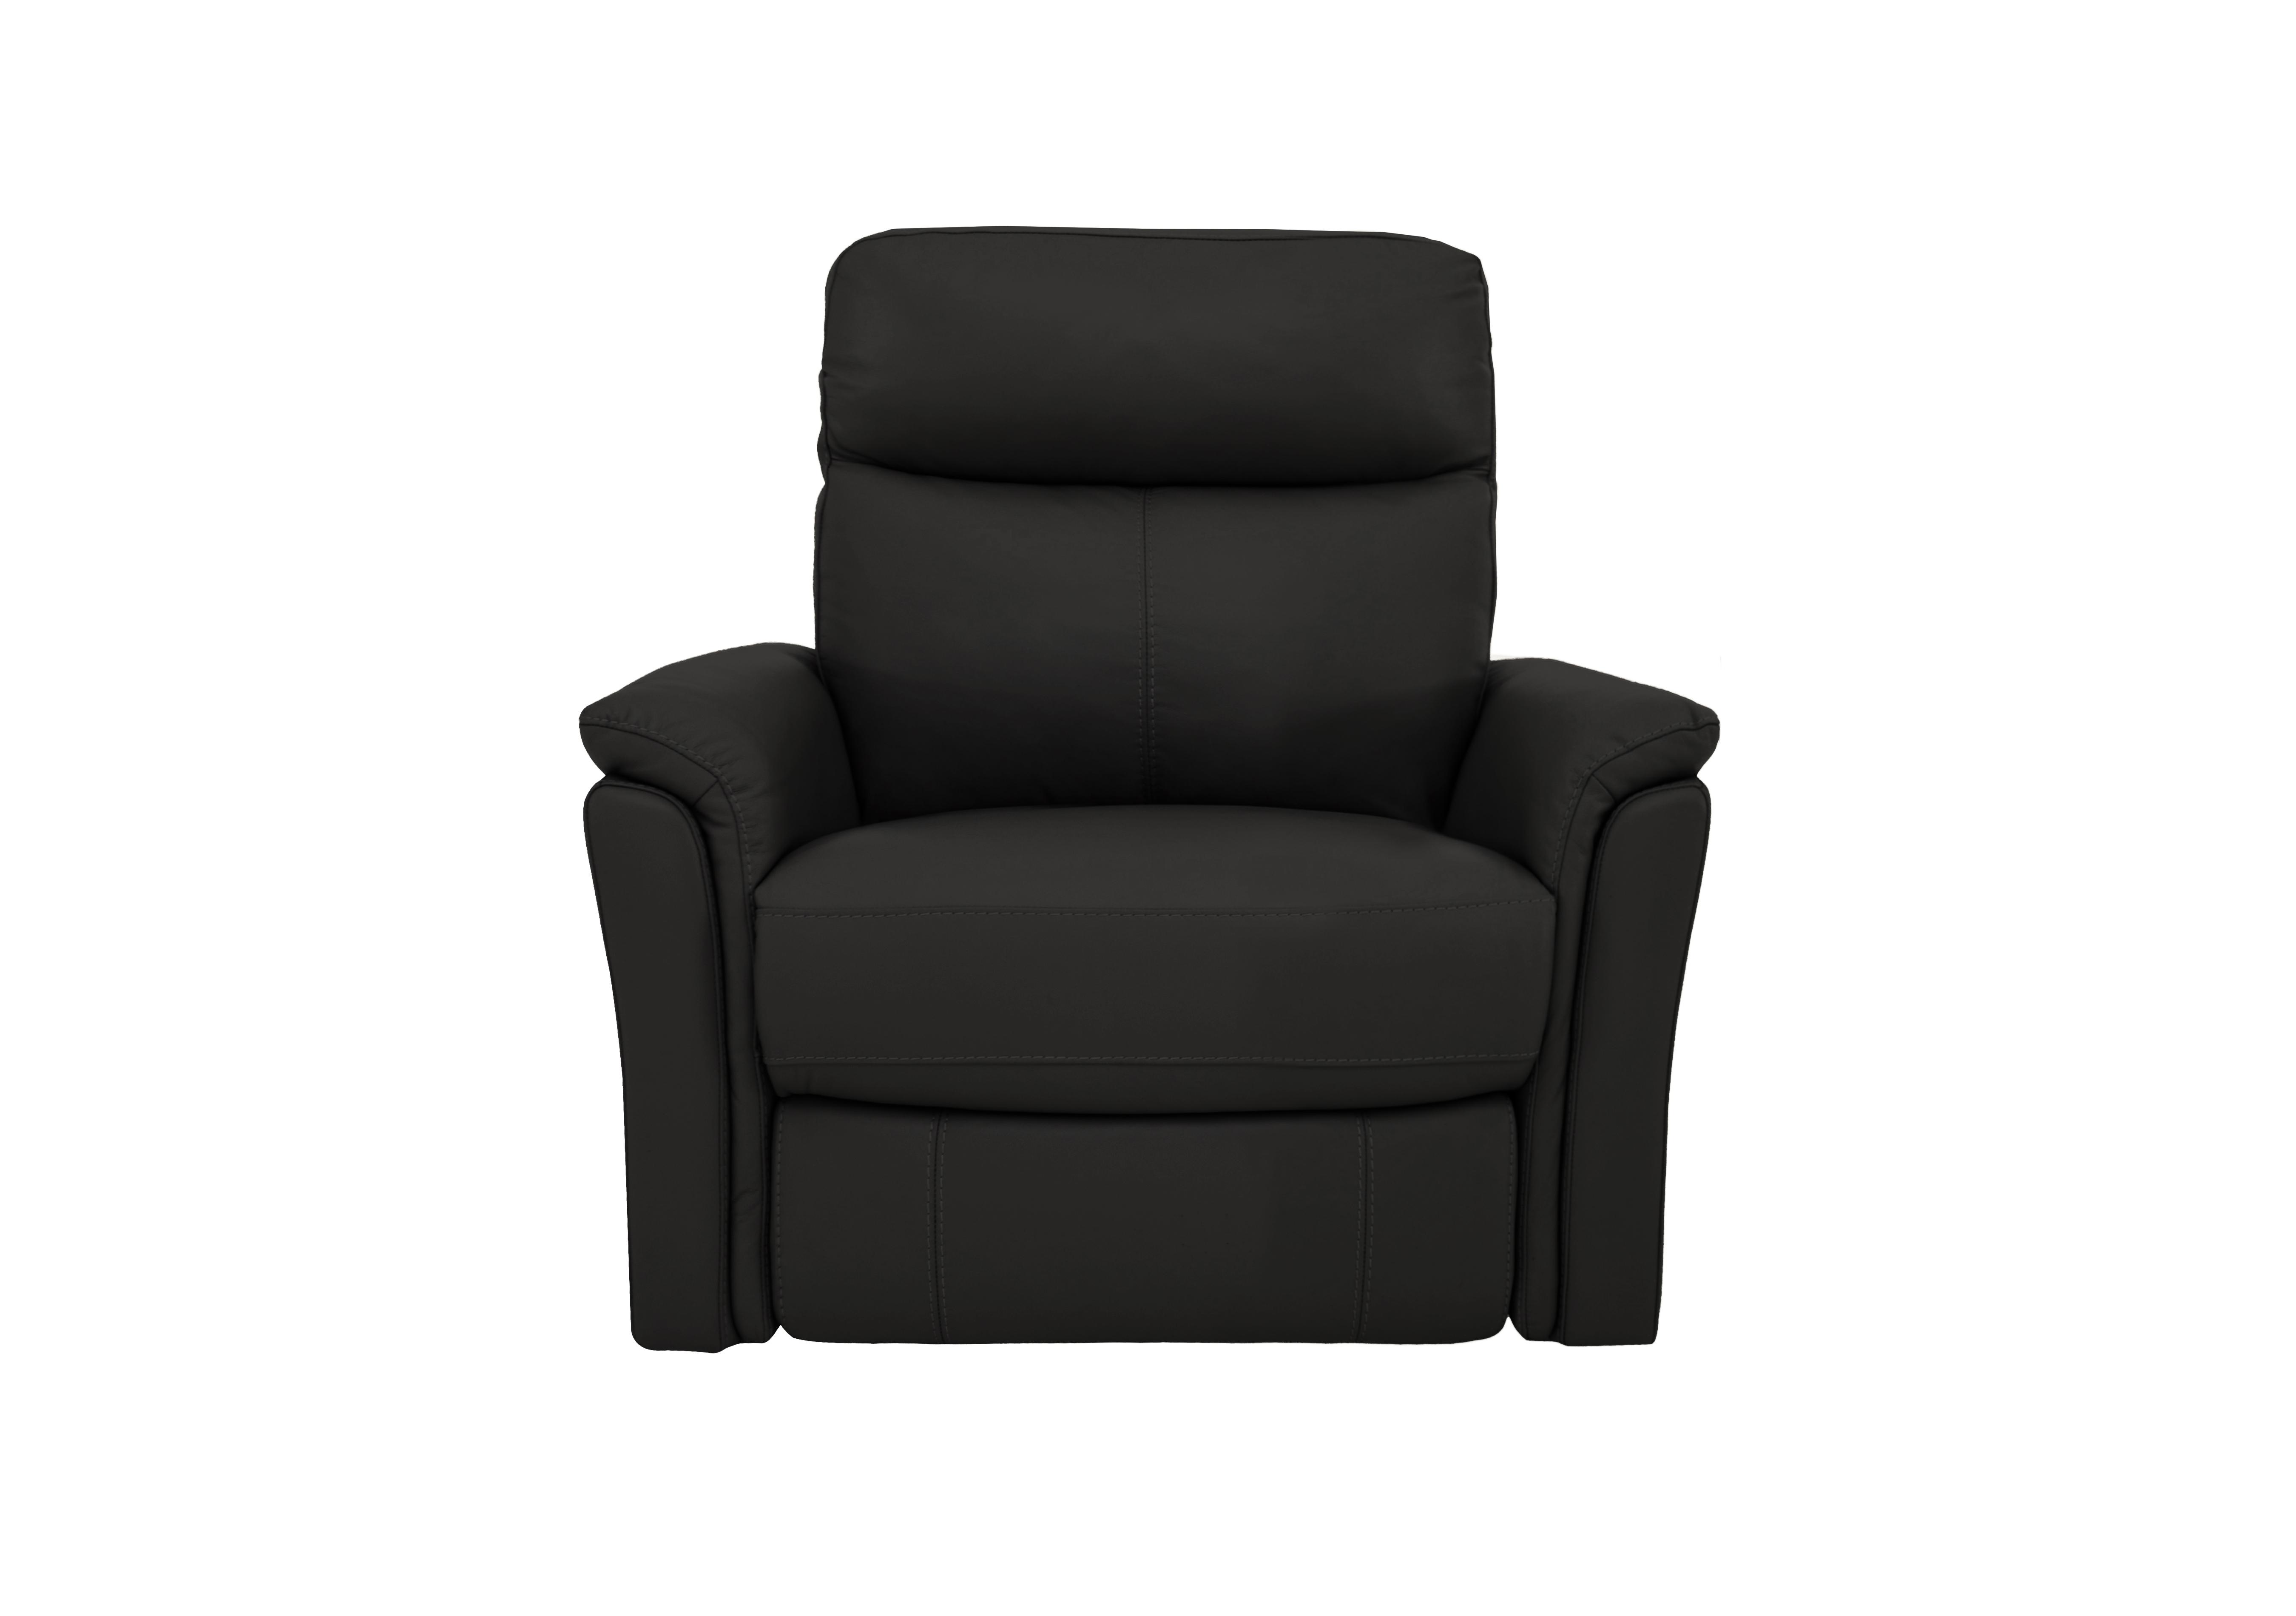 Compact Collection Piccolo Recliner Armchair in Bv-3500 Classic Black on Furniture Village